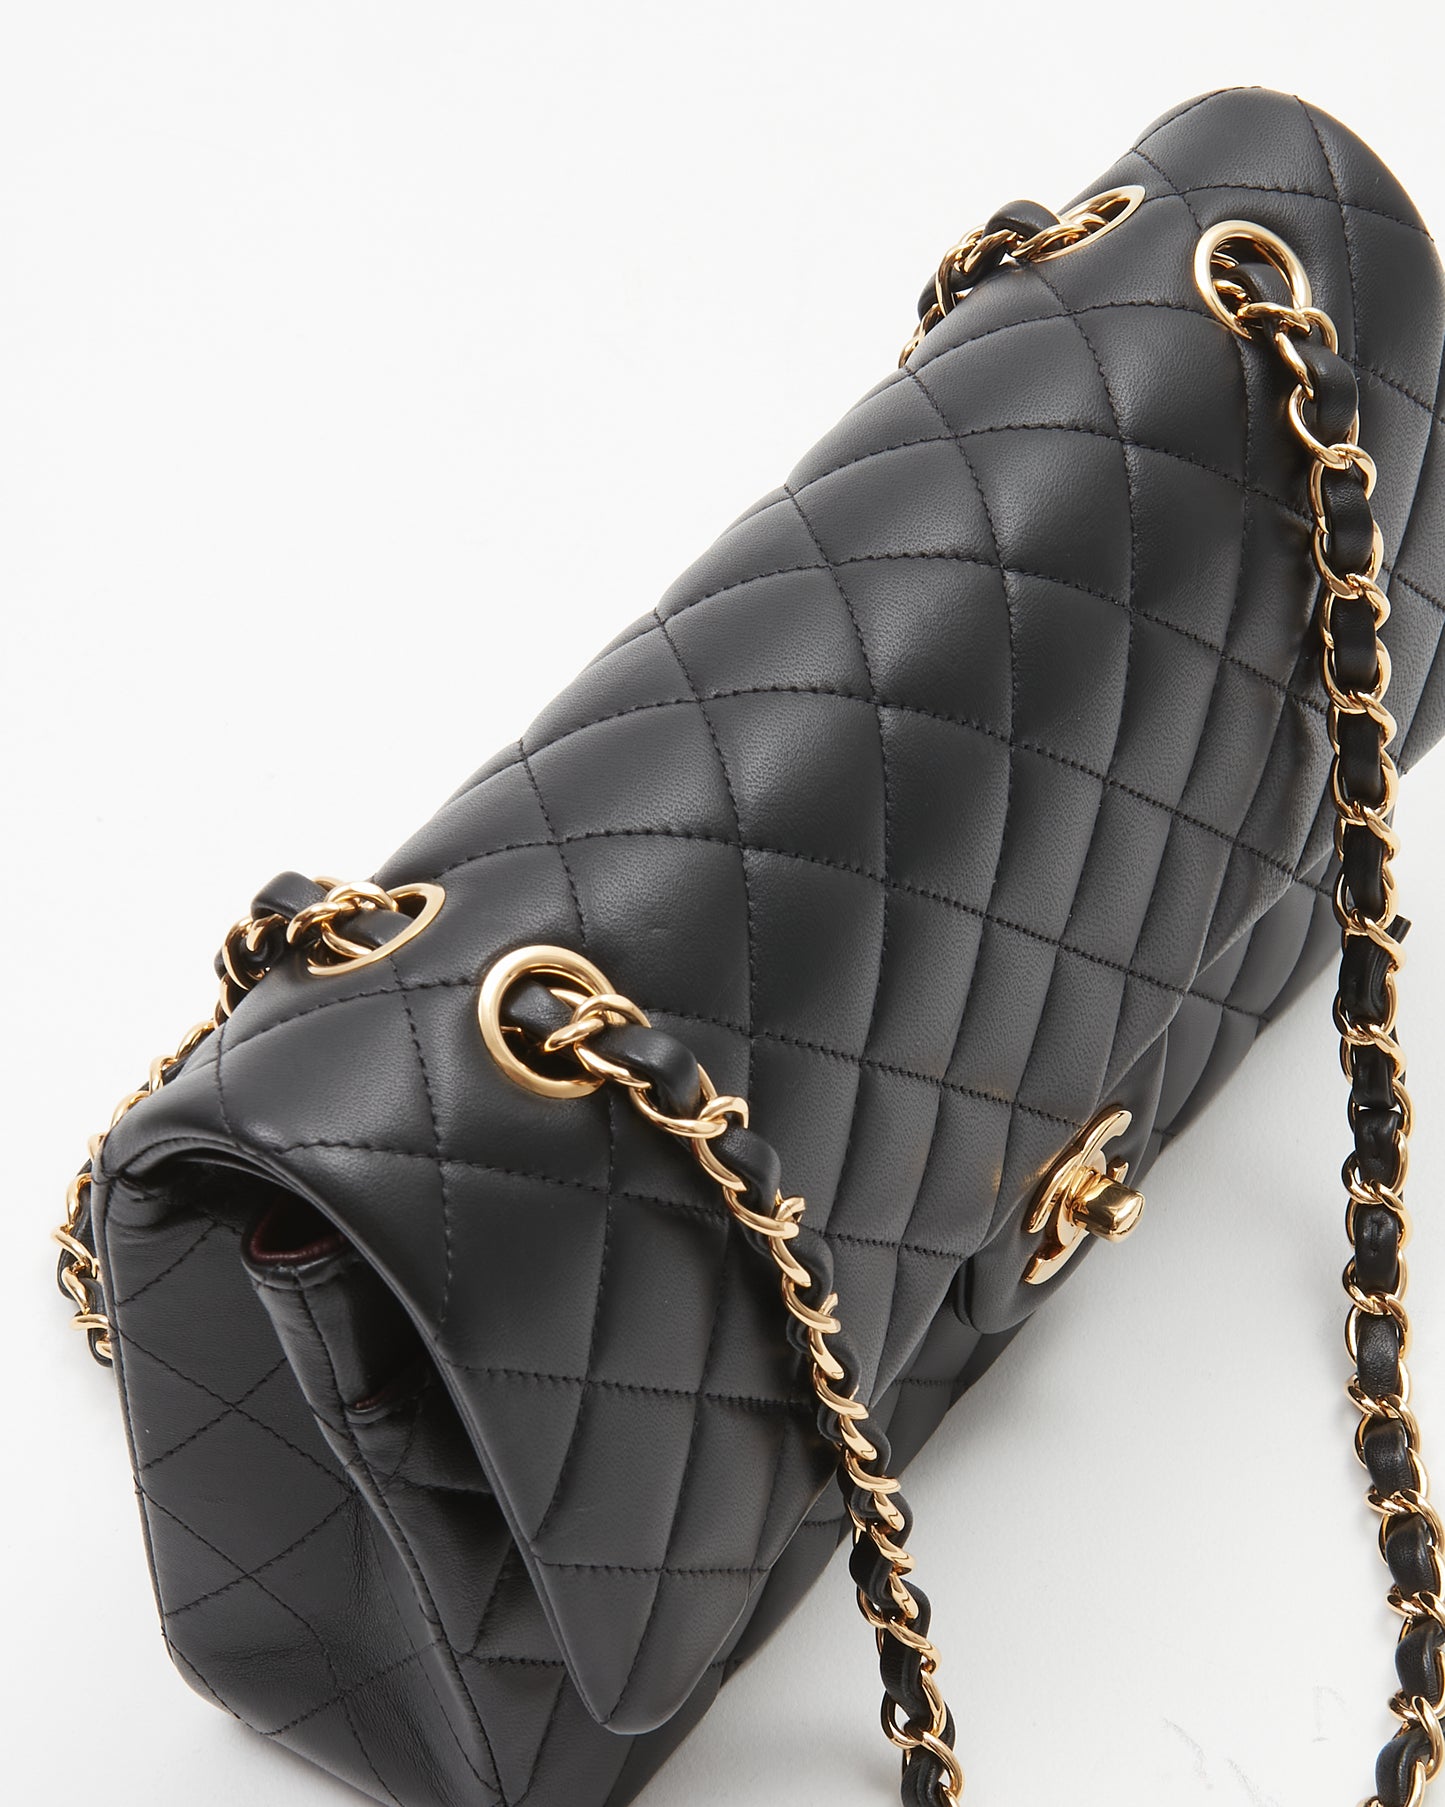 Chanel Black Lambskin Quilted Medium Classic Double Flap Bag